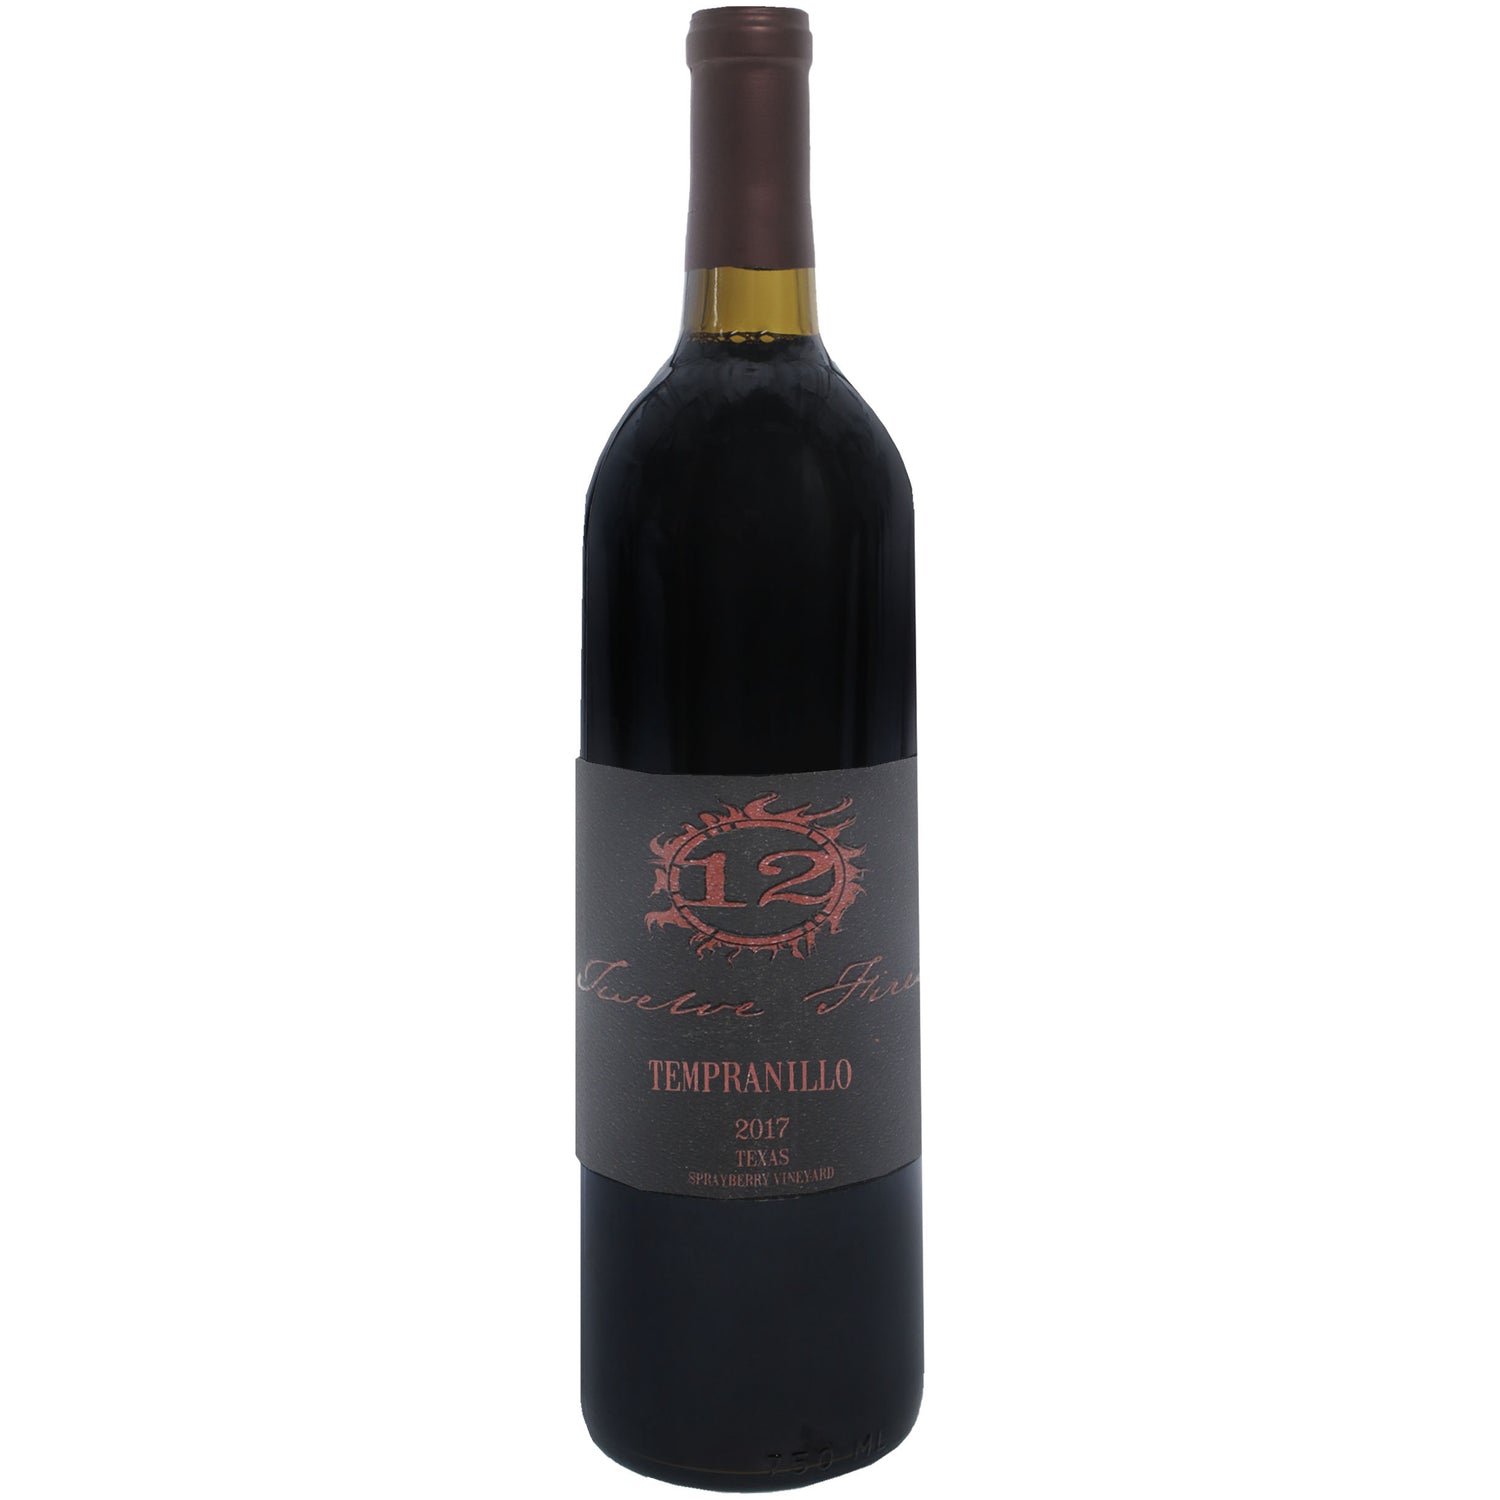 In Store Pickup Or Local Delivery Only: 12 Fires Tempranillo 2017 Wine